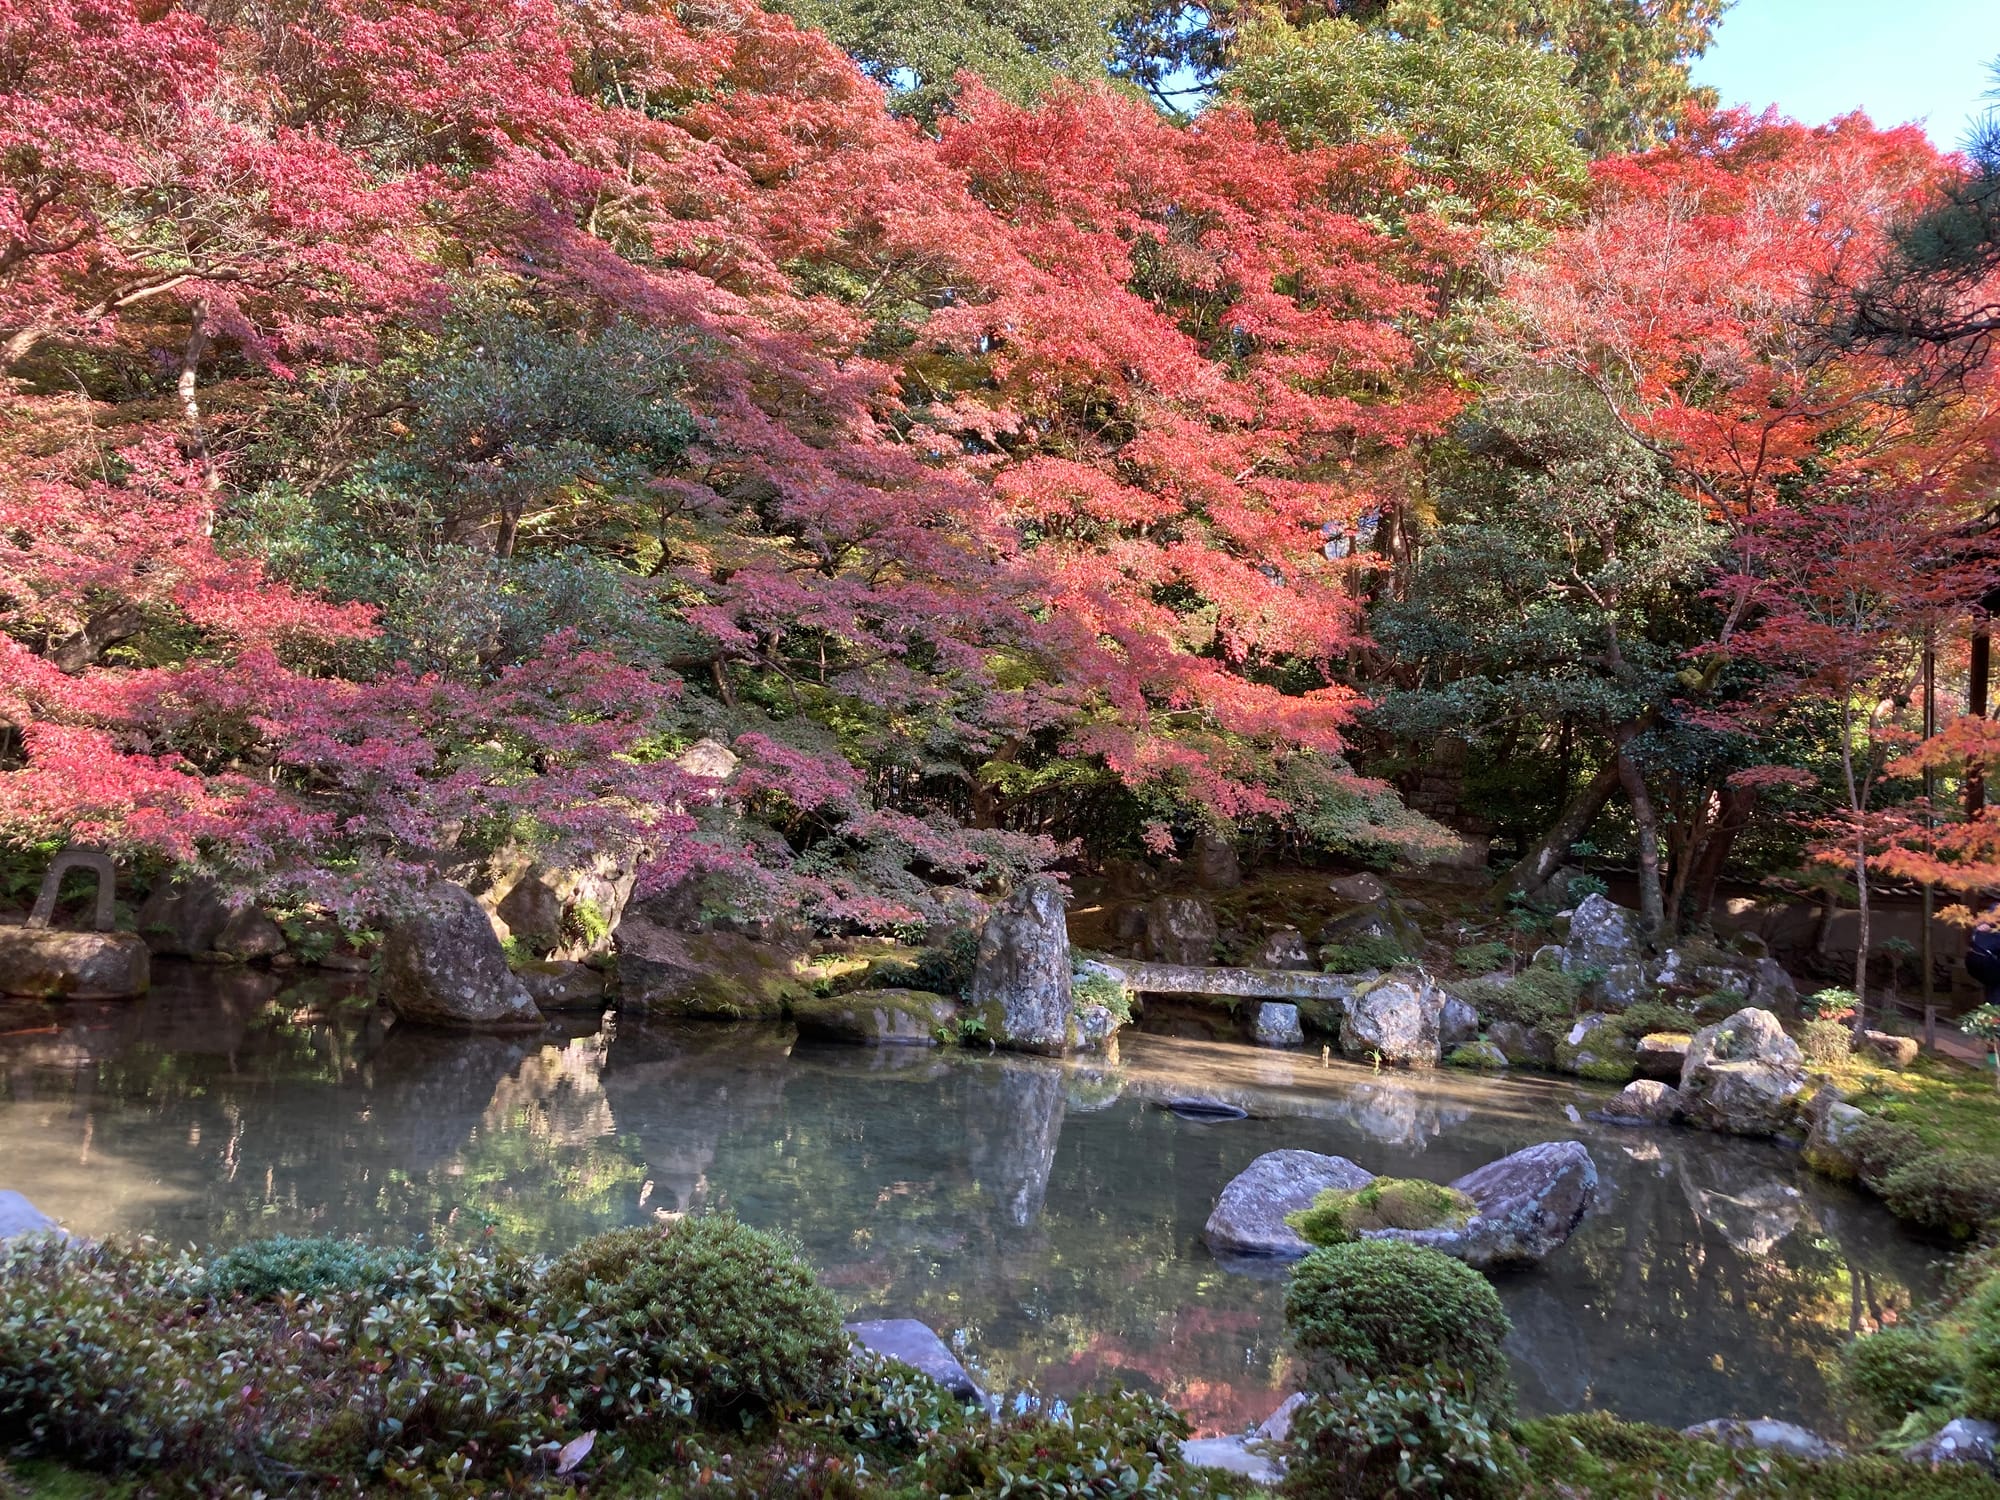 A temple pond with maple trees of varying red hues partially overhanging the water. In the foreground, the pond is bordered by manicured round shrubs and small flowers. Large stones are both in and around the pond.